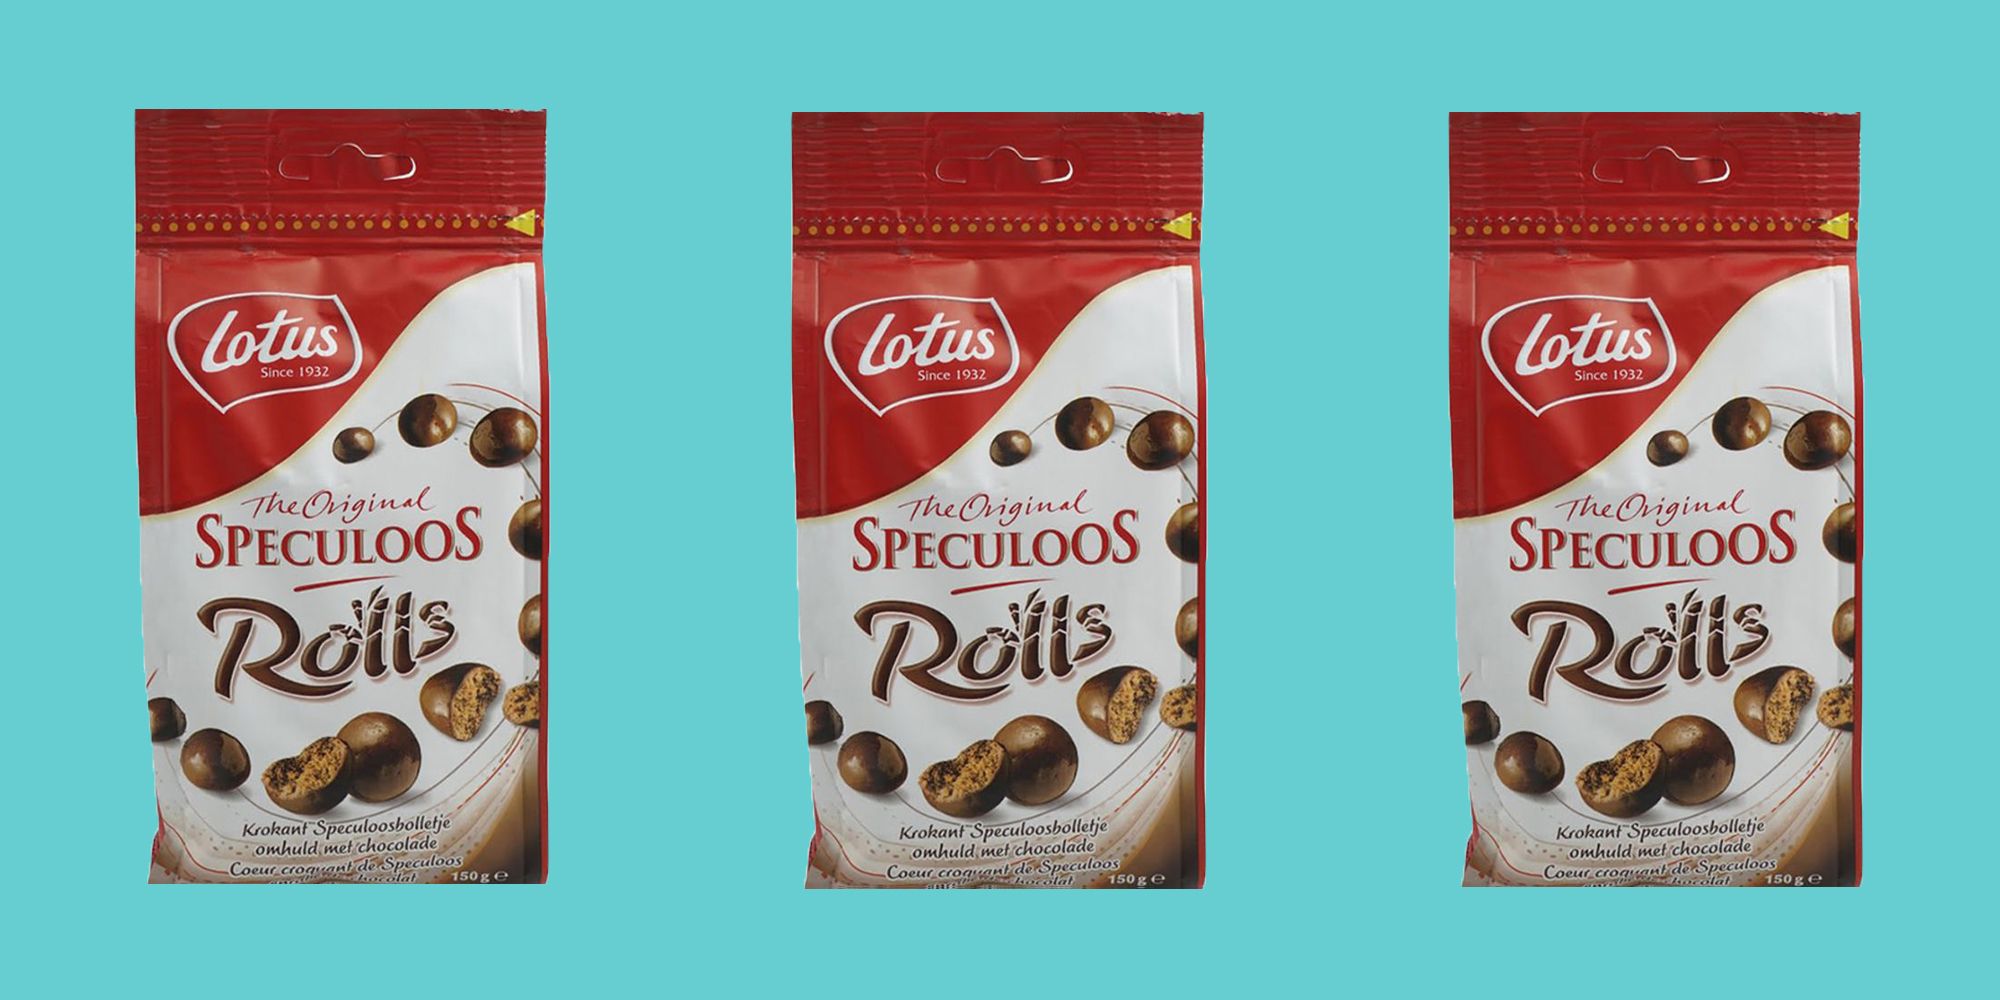 Lotus Biscoff Speculoos Rolls Are Available To Buy In The UK